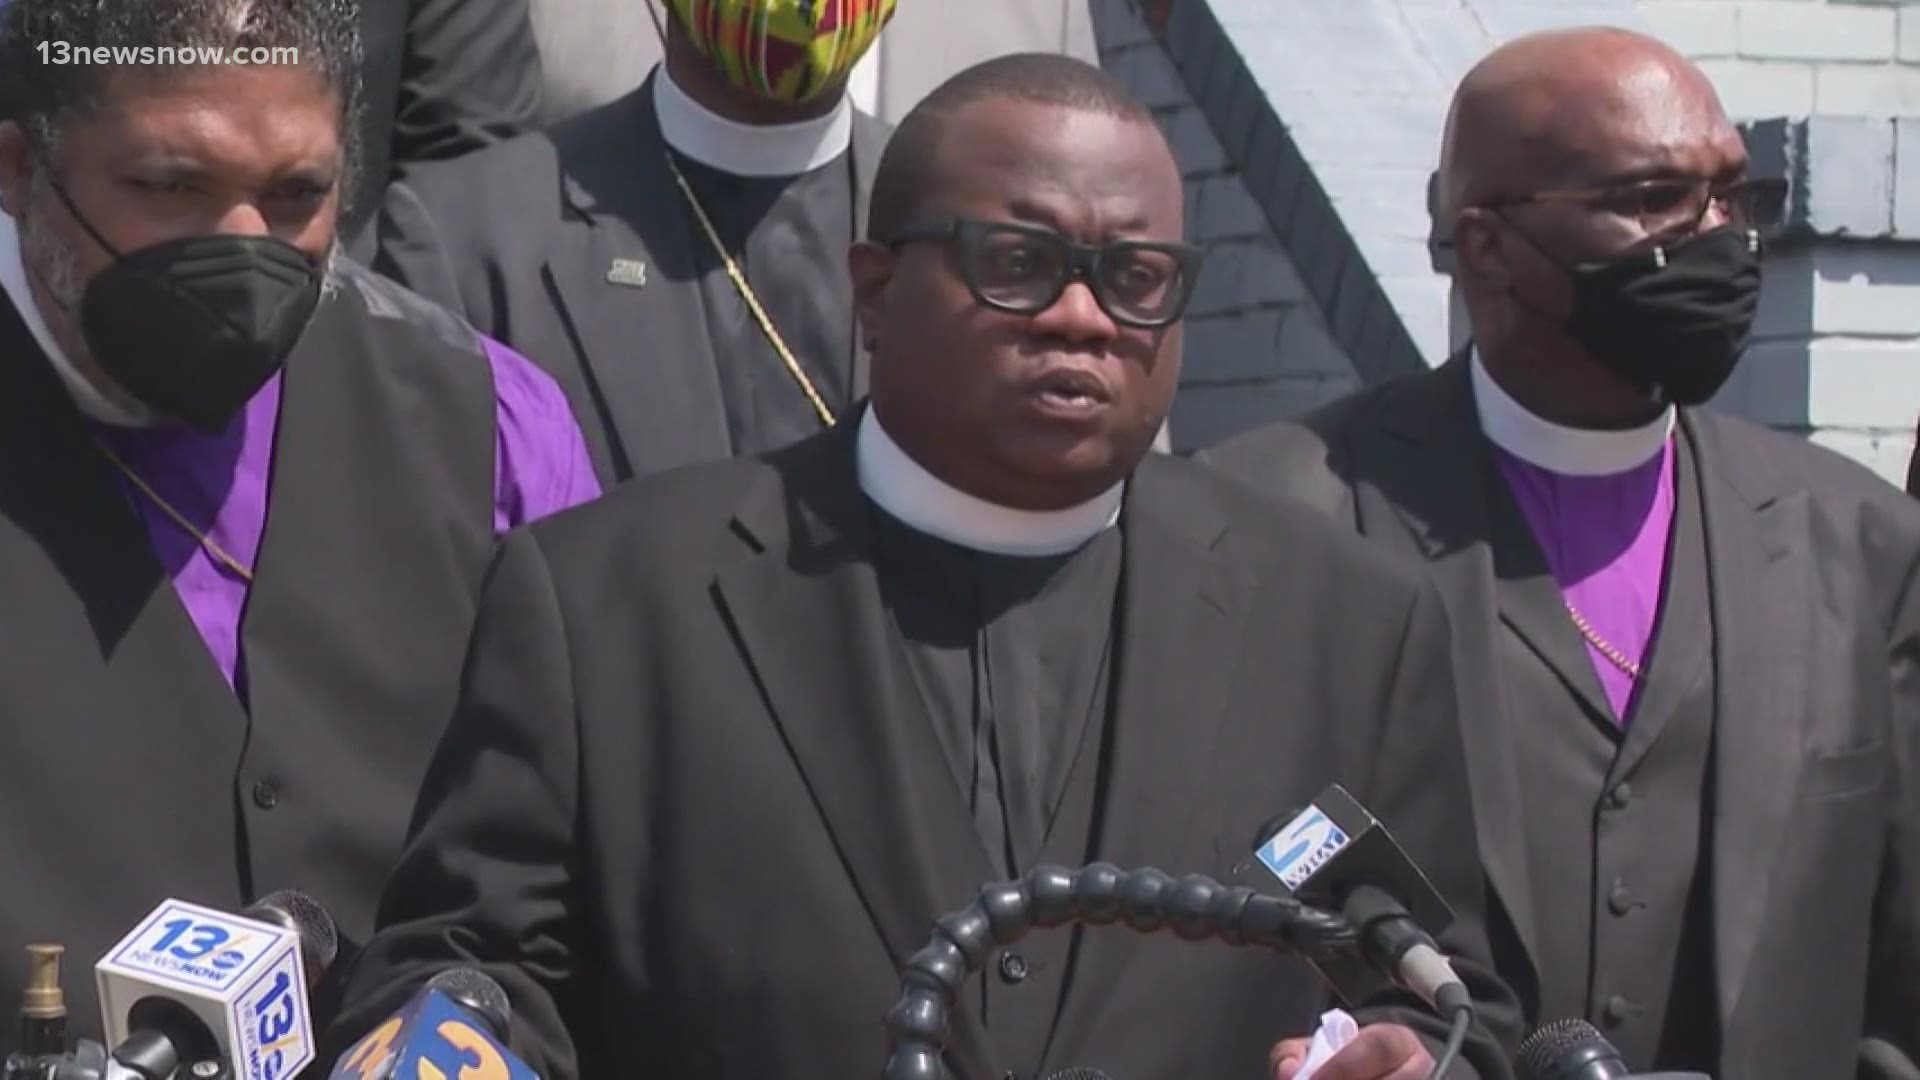 Faith leaders across North Carolina are demanding accountability in the death of Andrew Brown Junior.